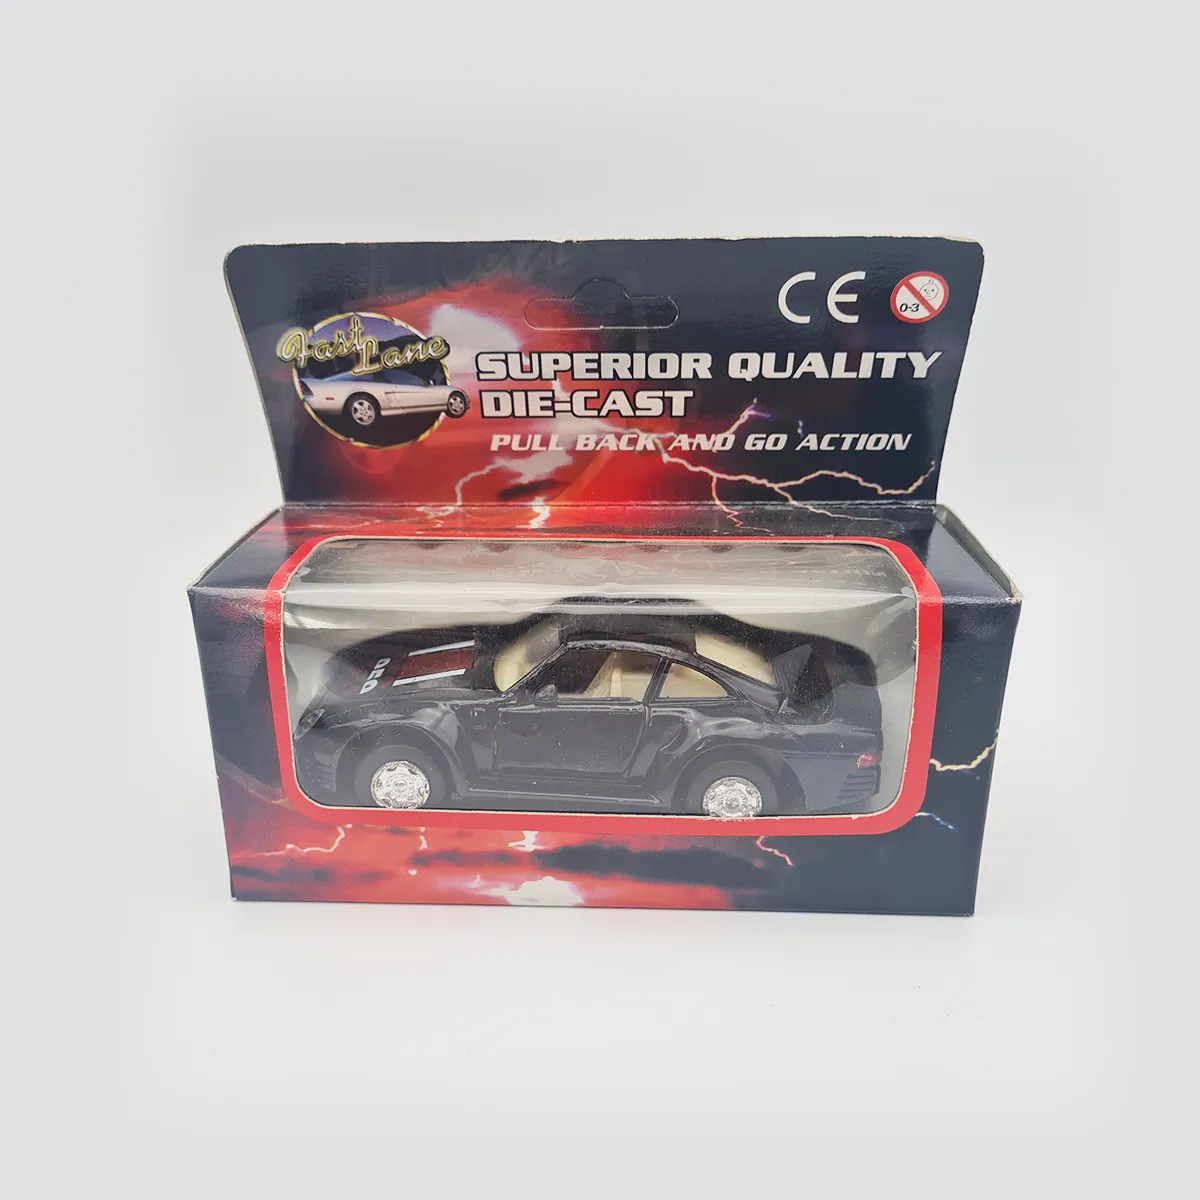 Die-Cast Superior Quality Pull Back And Go Action Toy Cars 2